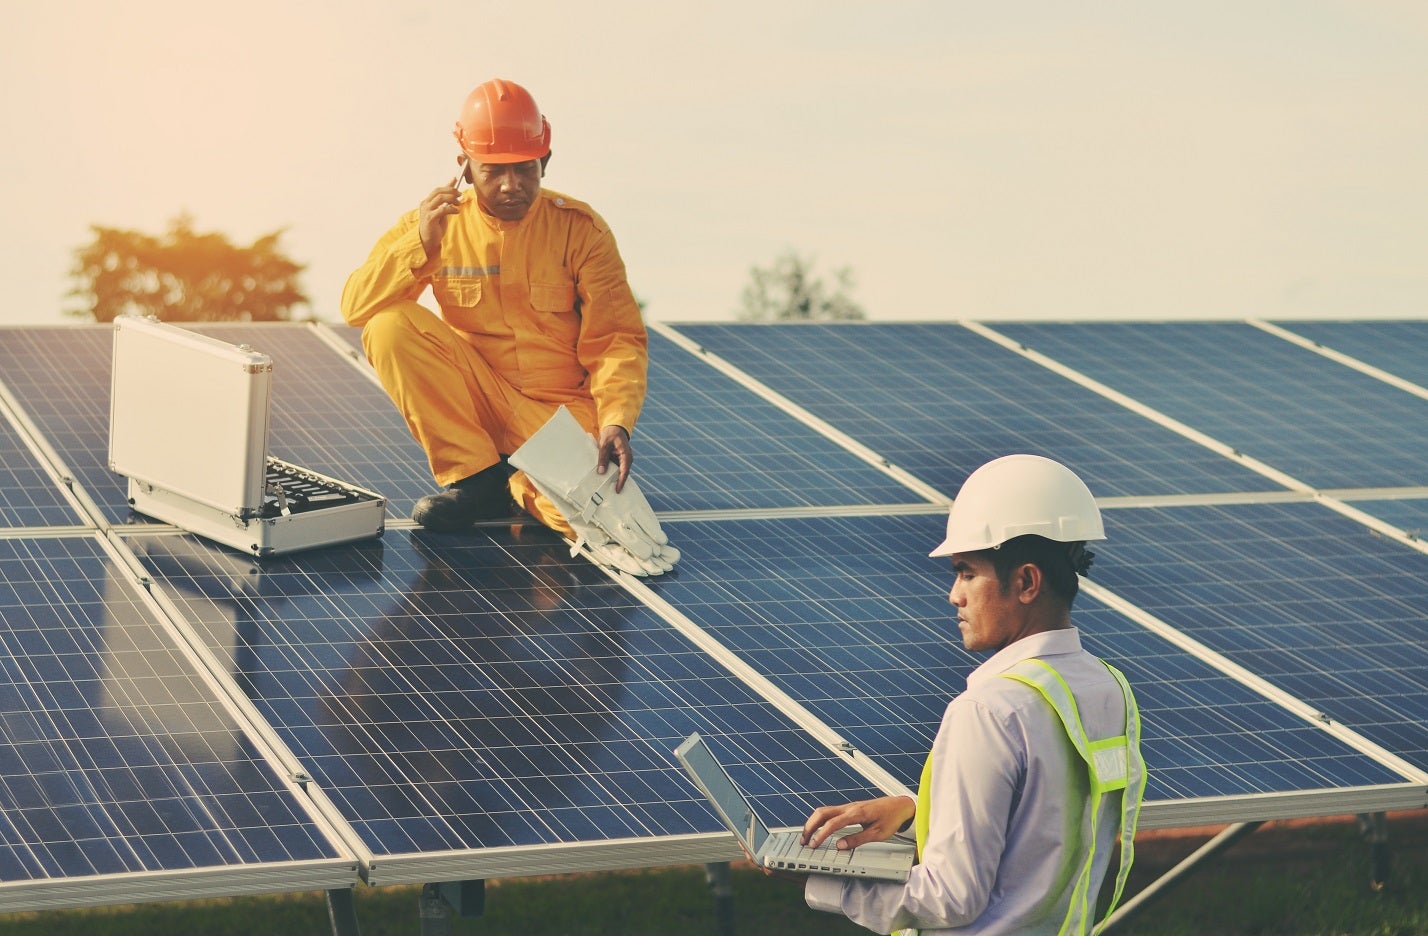 Two men working at a solar power station. Photo: © Sonpichit Salangsing/Shutterstock